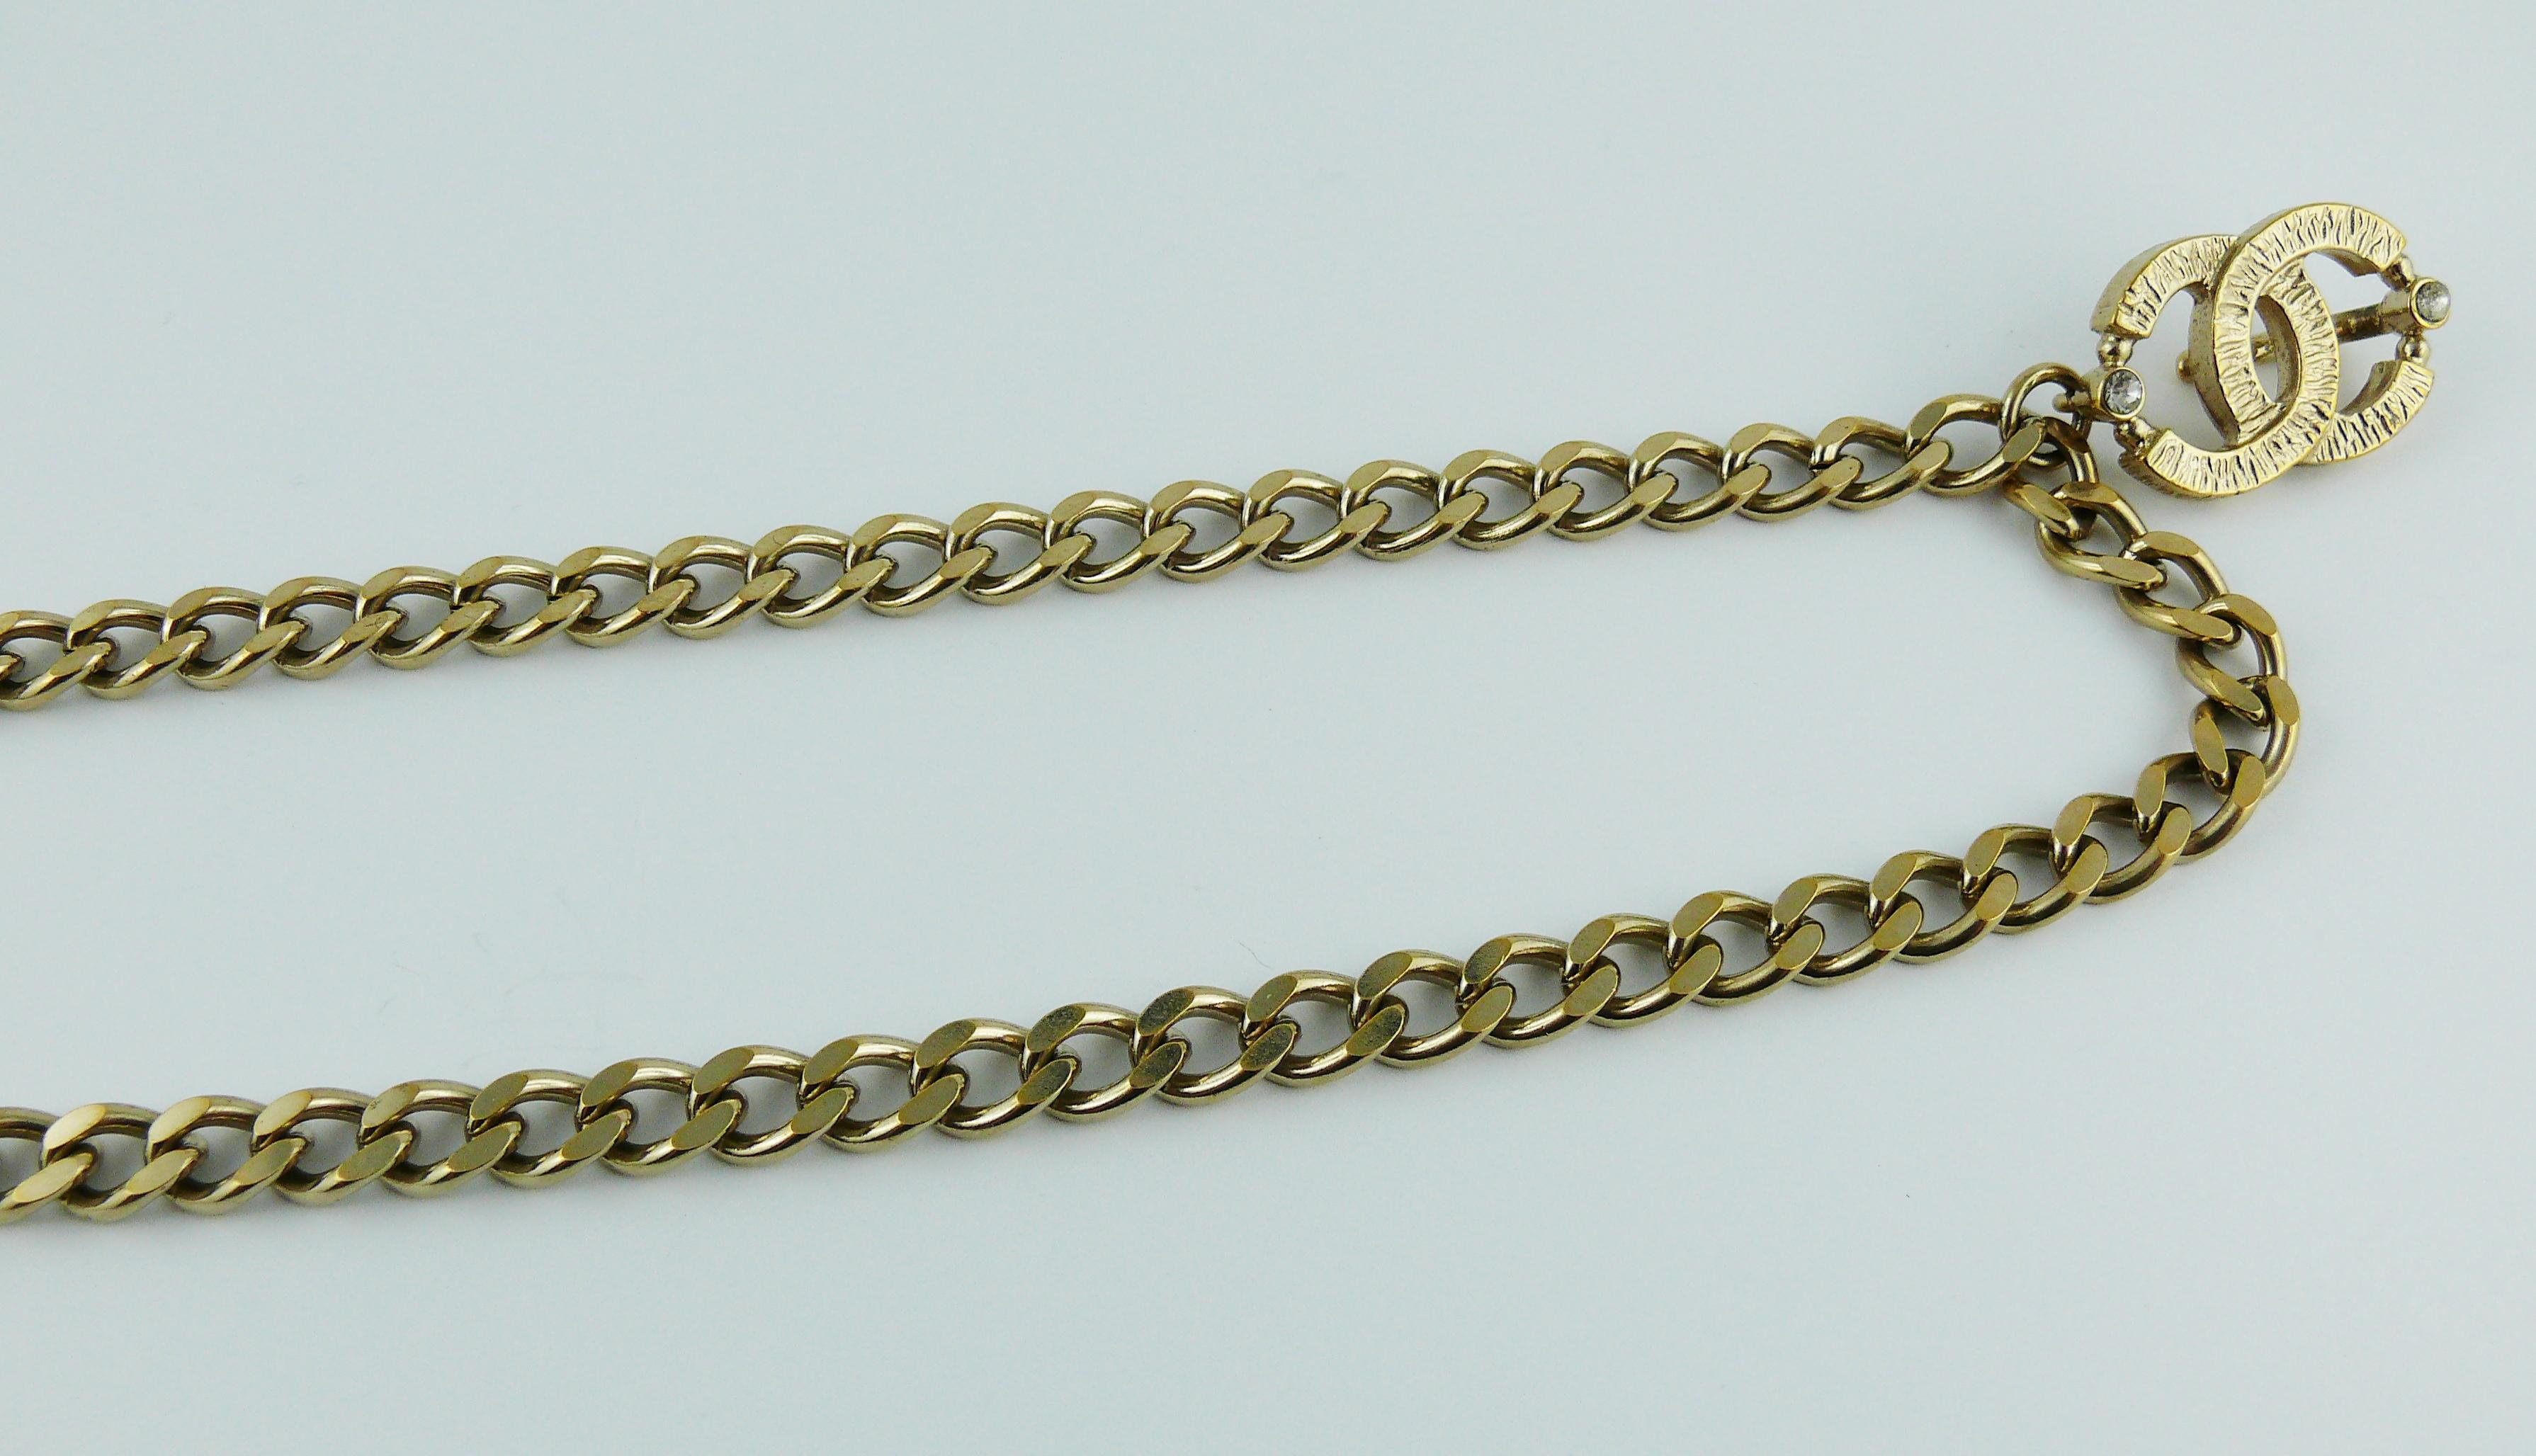 Women's Chanel 2005 Clover and CC Chain Link Belt Necklace